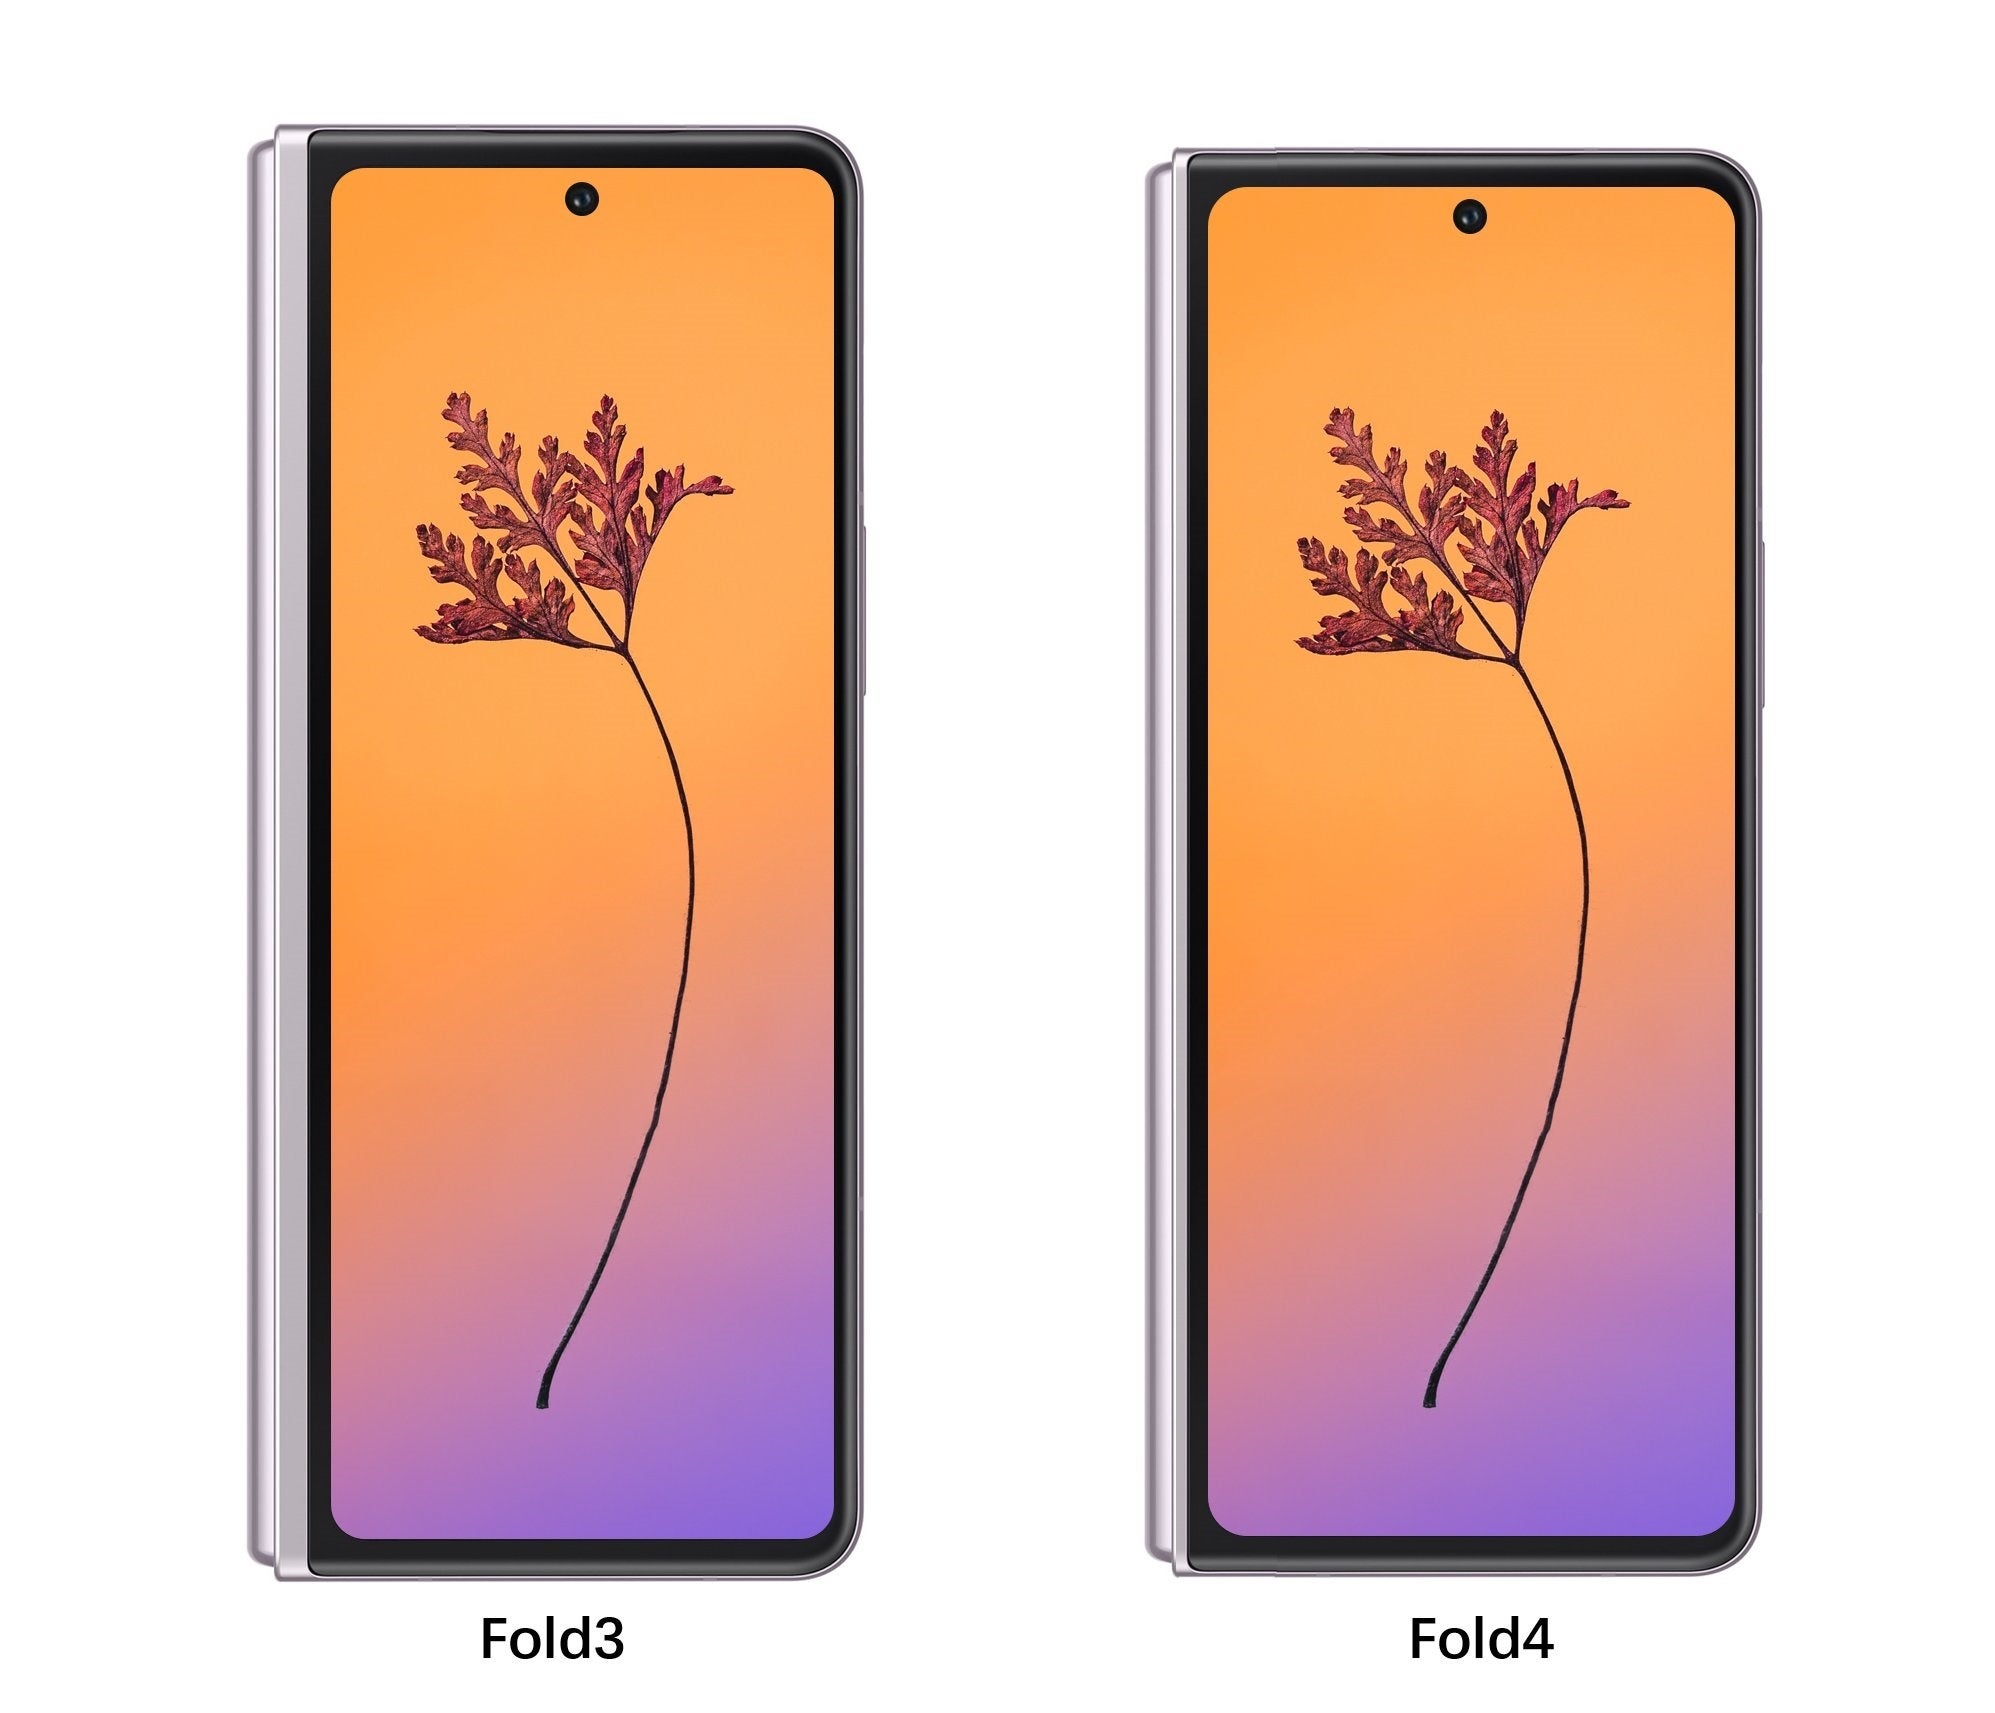 Galaxy Z Fold 4 outer display and holepunch selfie camera (Image credit - Ice Universe) - Samsung Galaxy Z Fold 4 preview: Peak Android